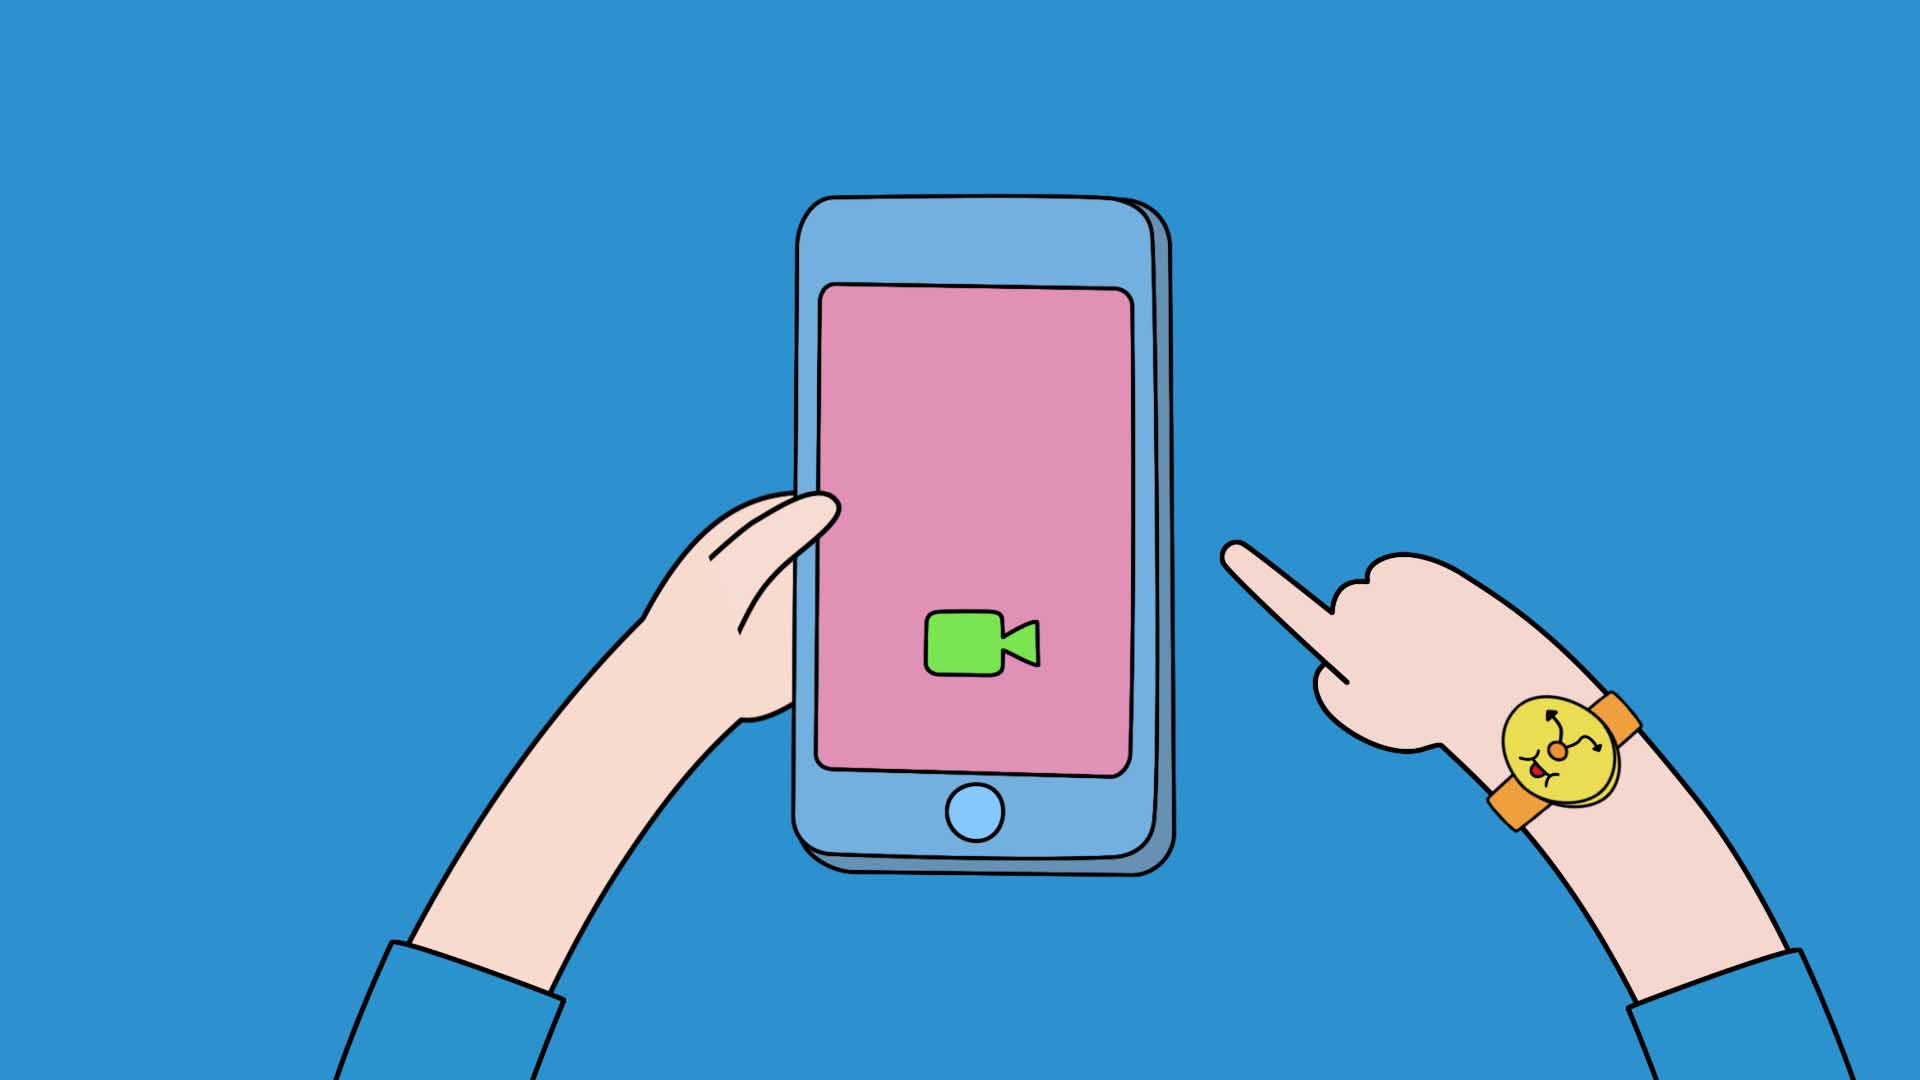 2D animated of hands holding a phone